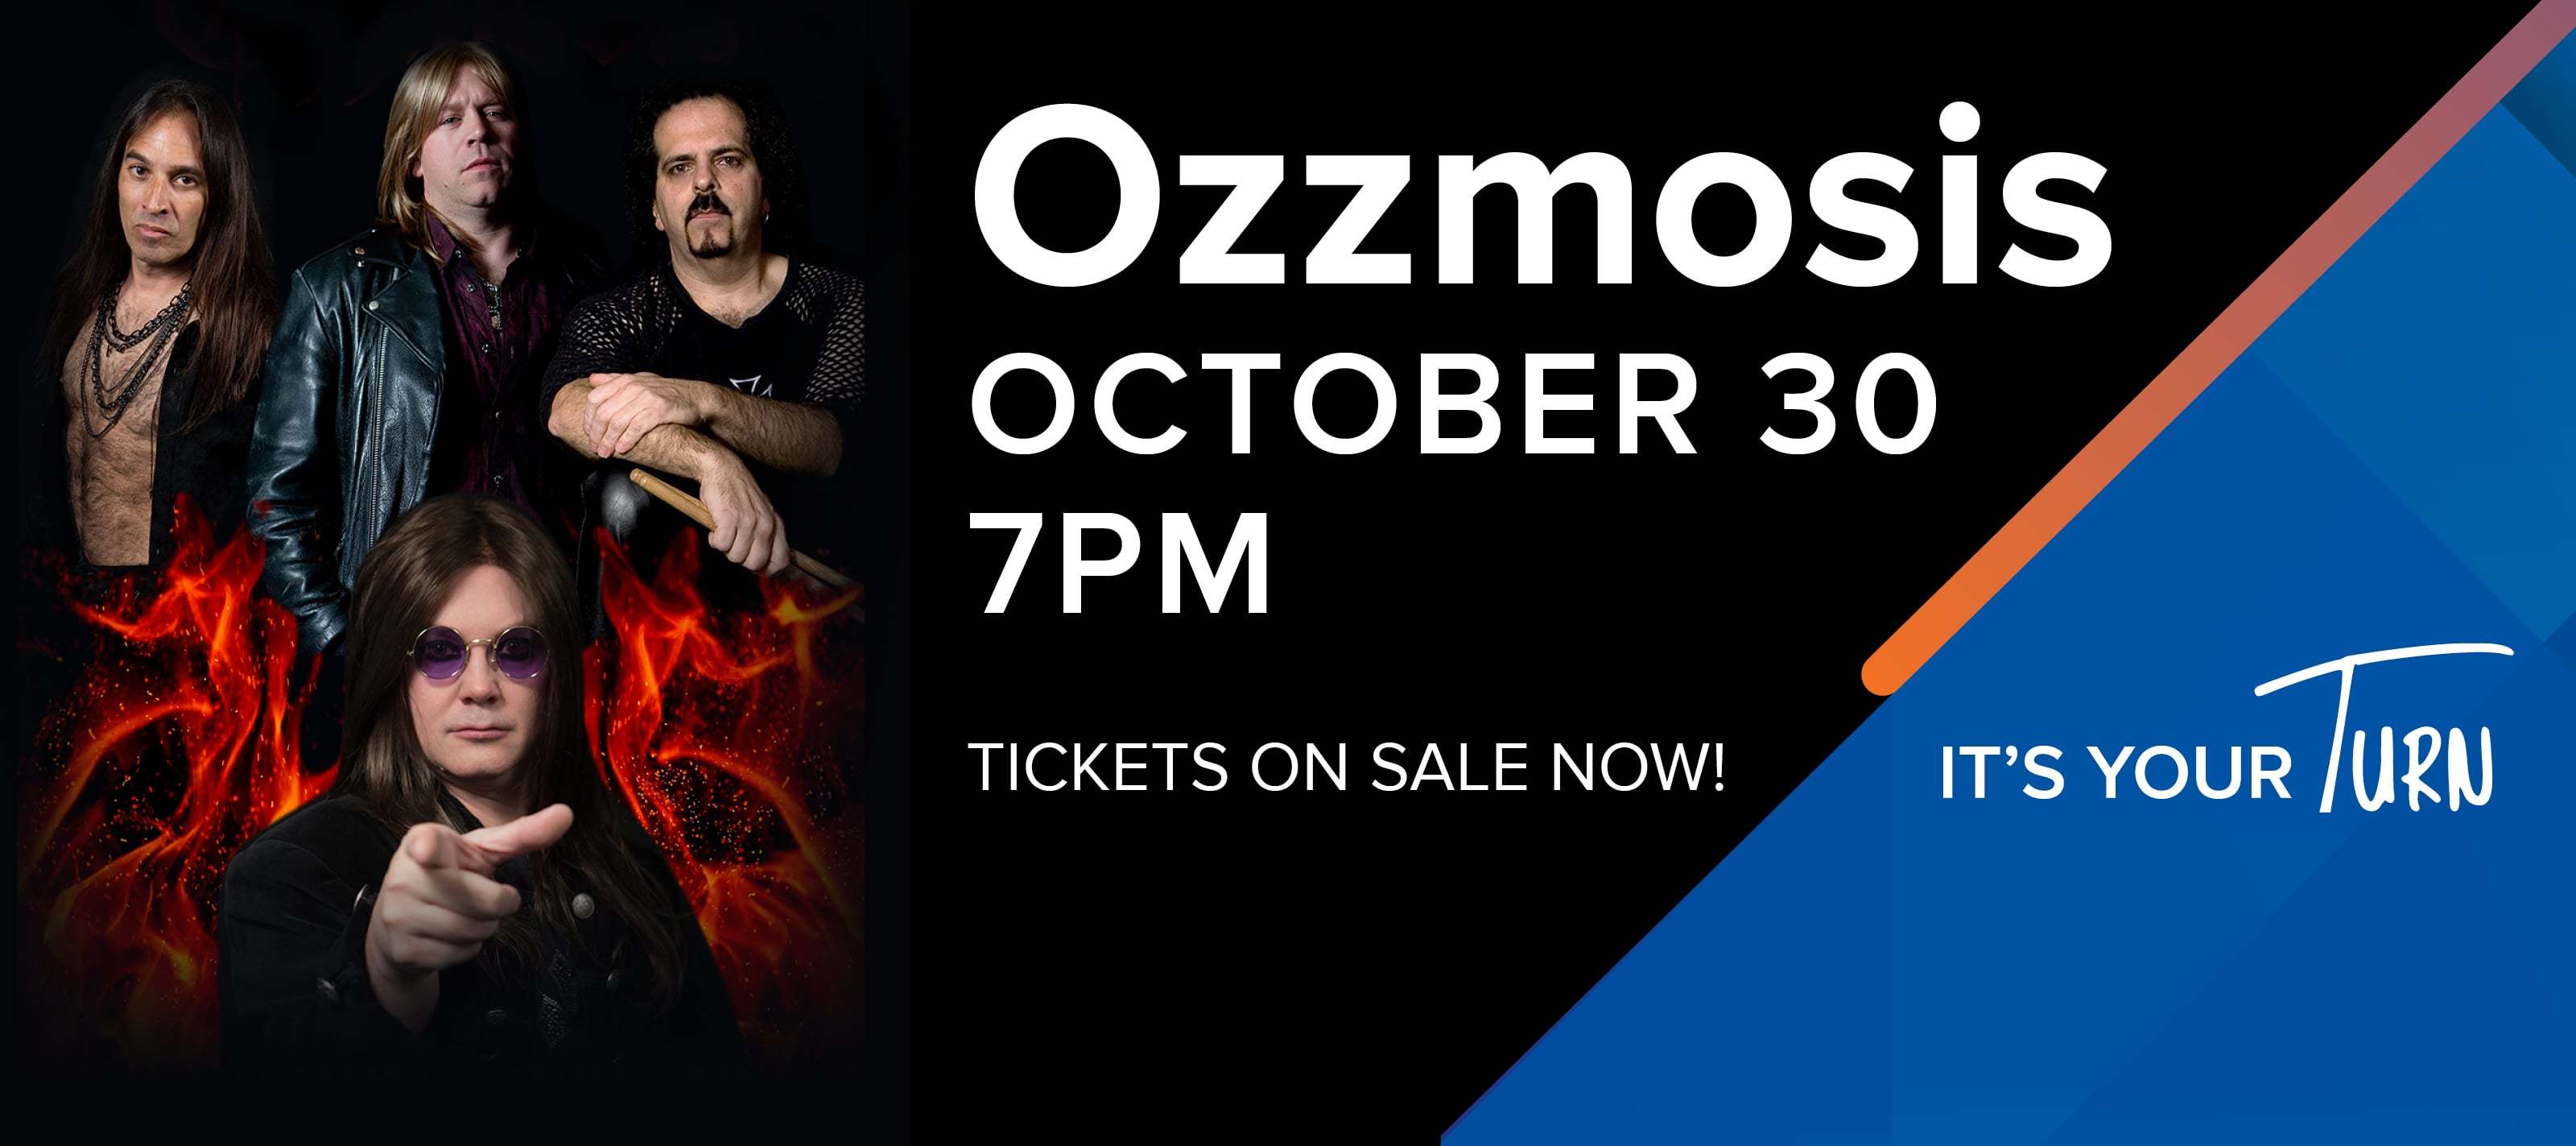 Ozzmosis Oct 30 7pm tickets on sale now